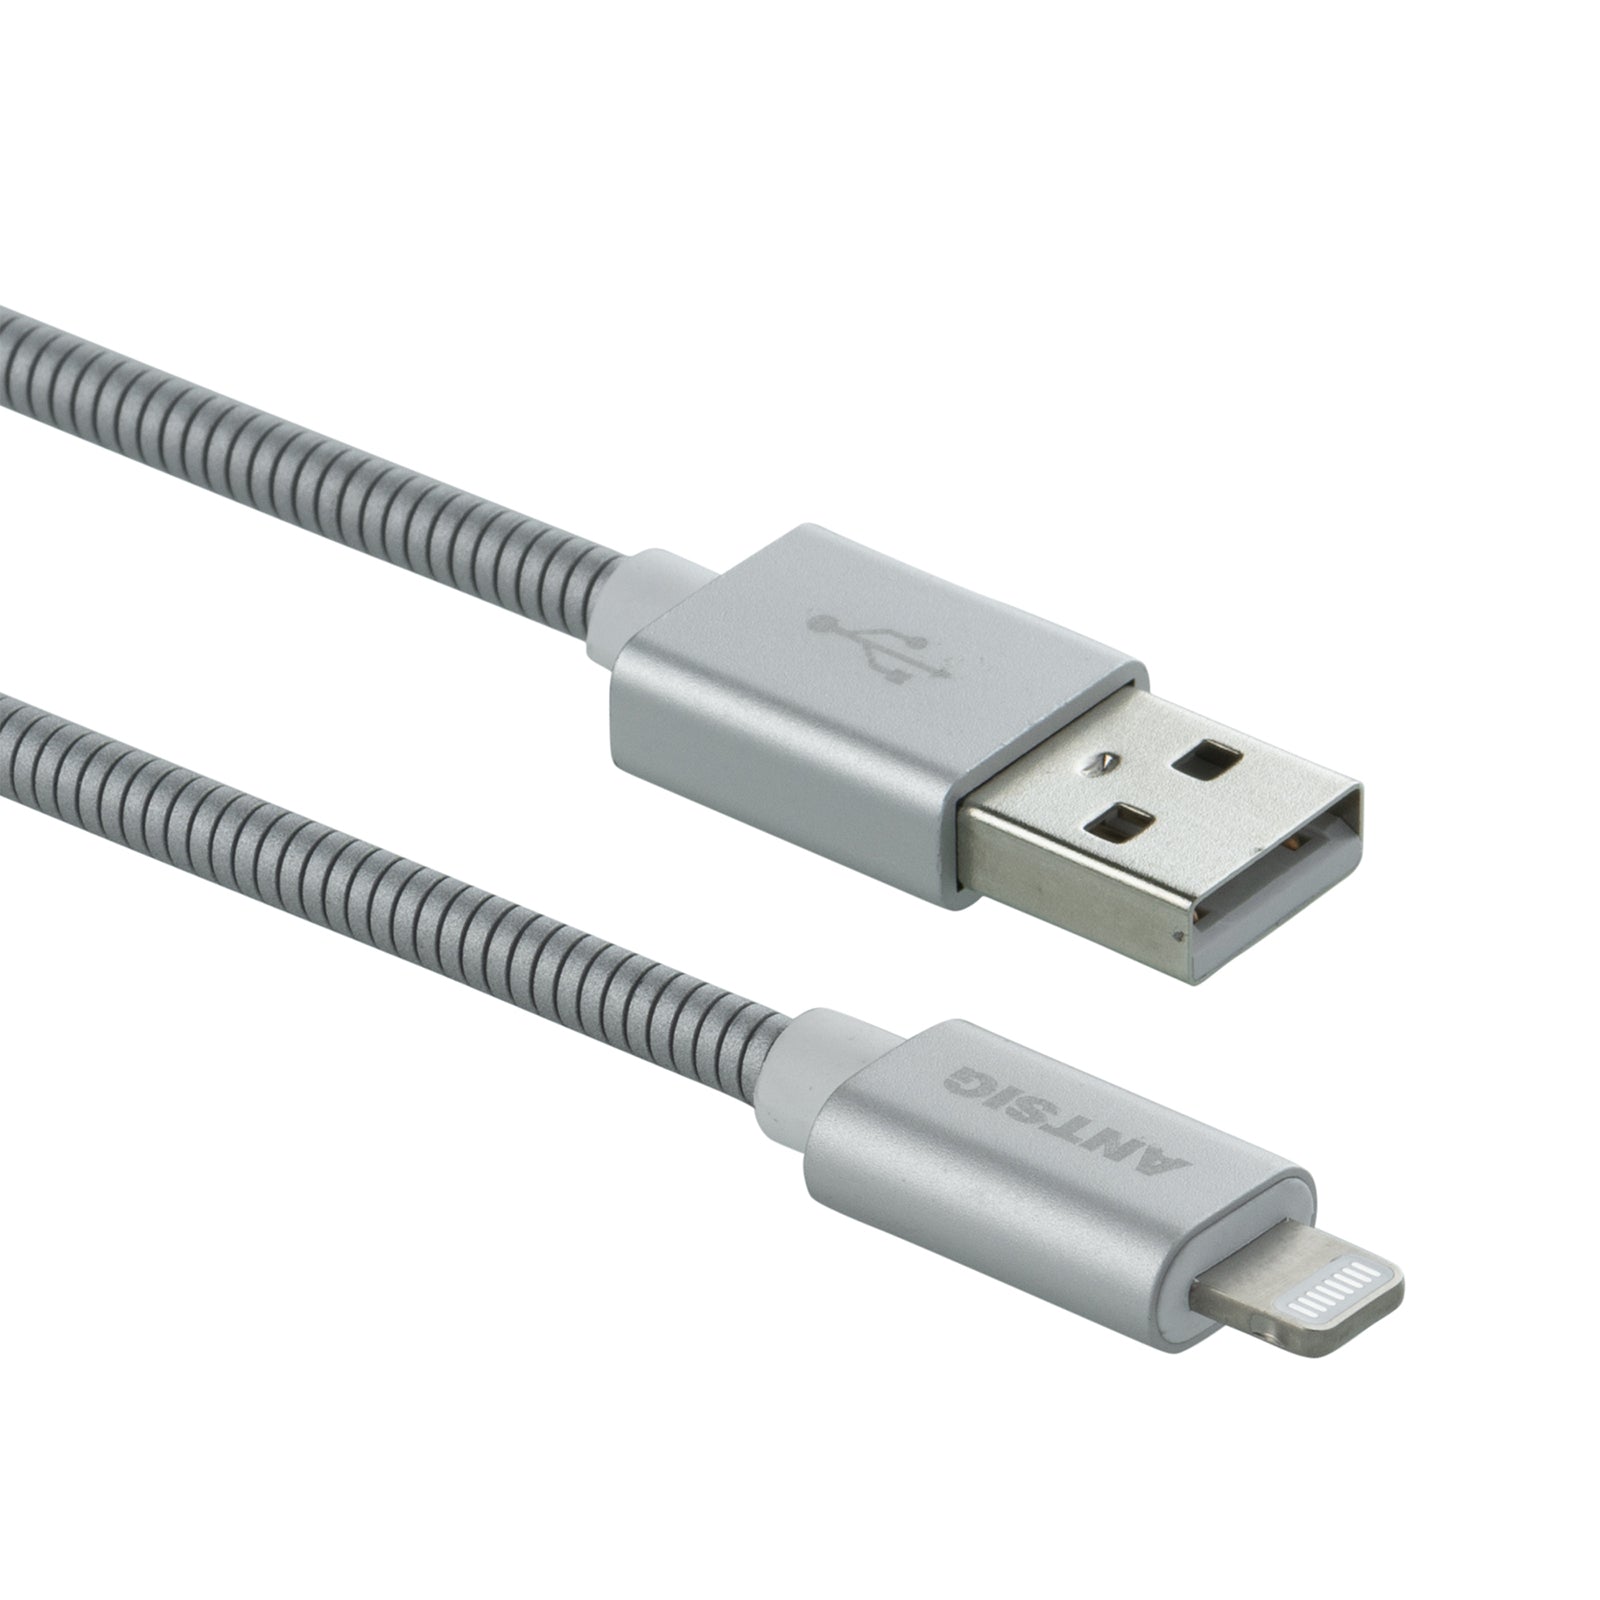 1.5m Lightning Cable to USB-A Steel Cable